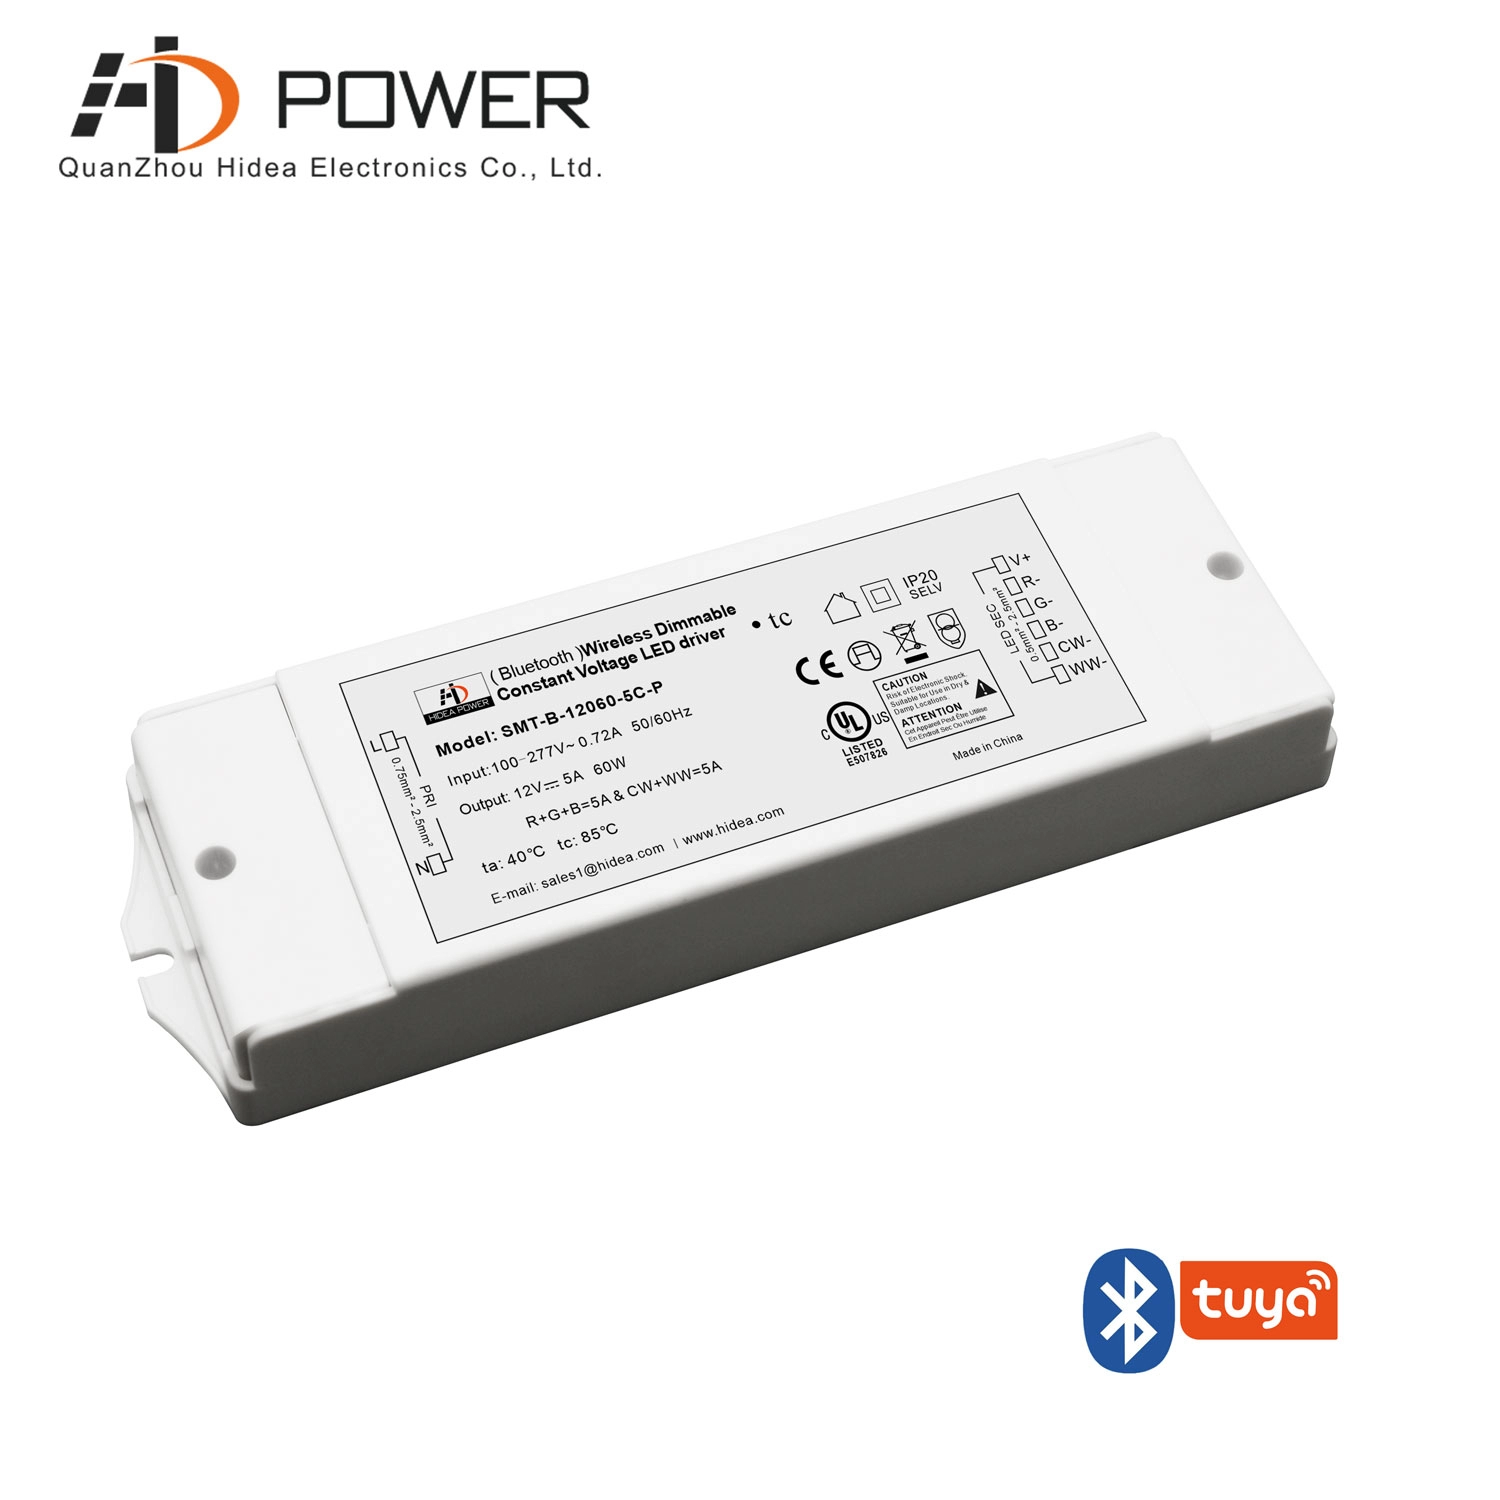 UL CE Bluetooth IP20 dimmende led driver 60w draadloos